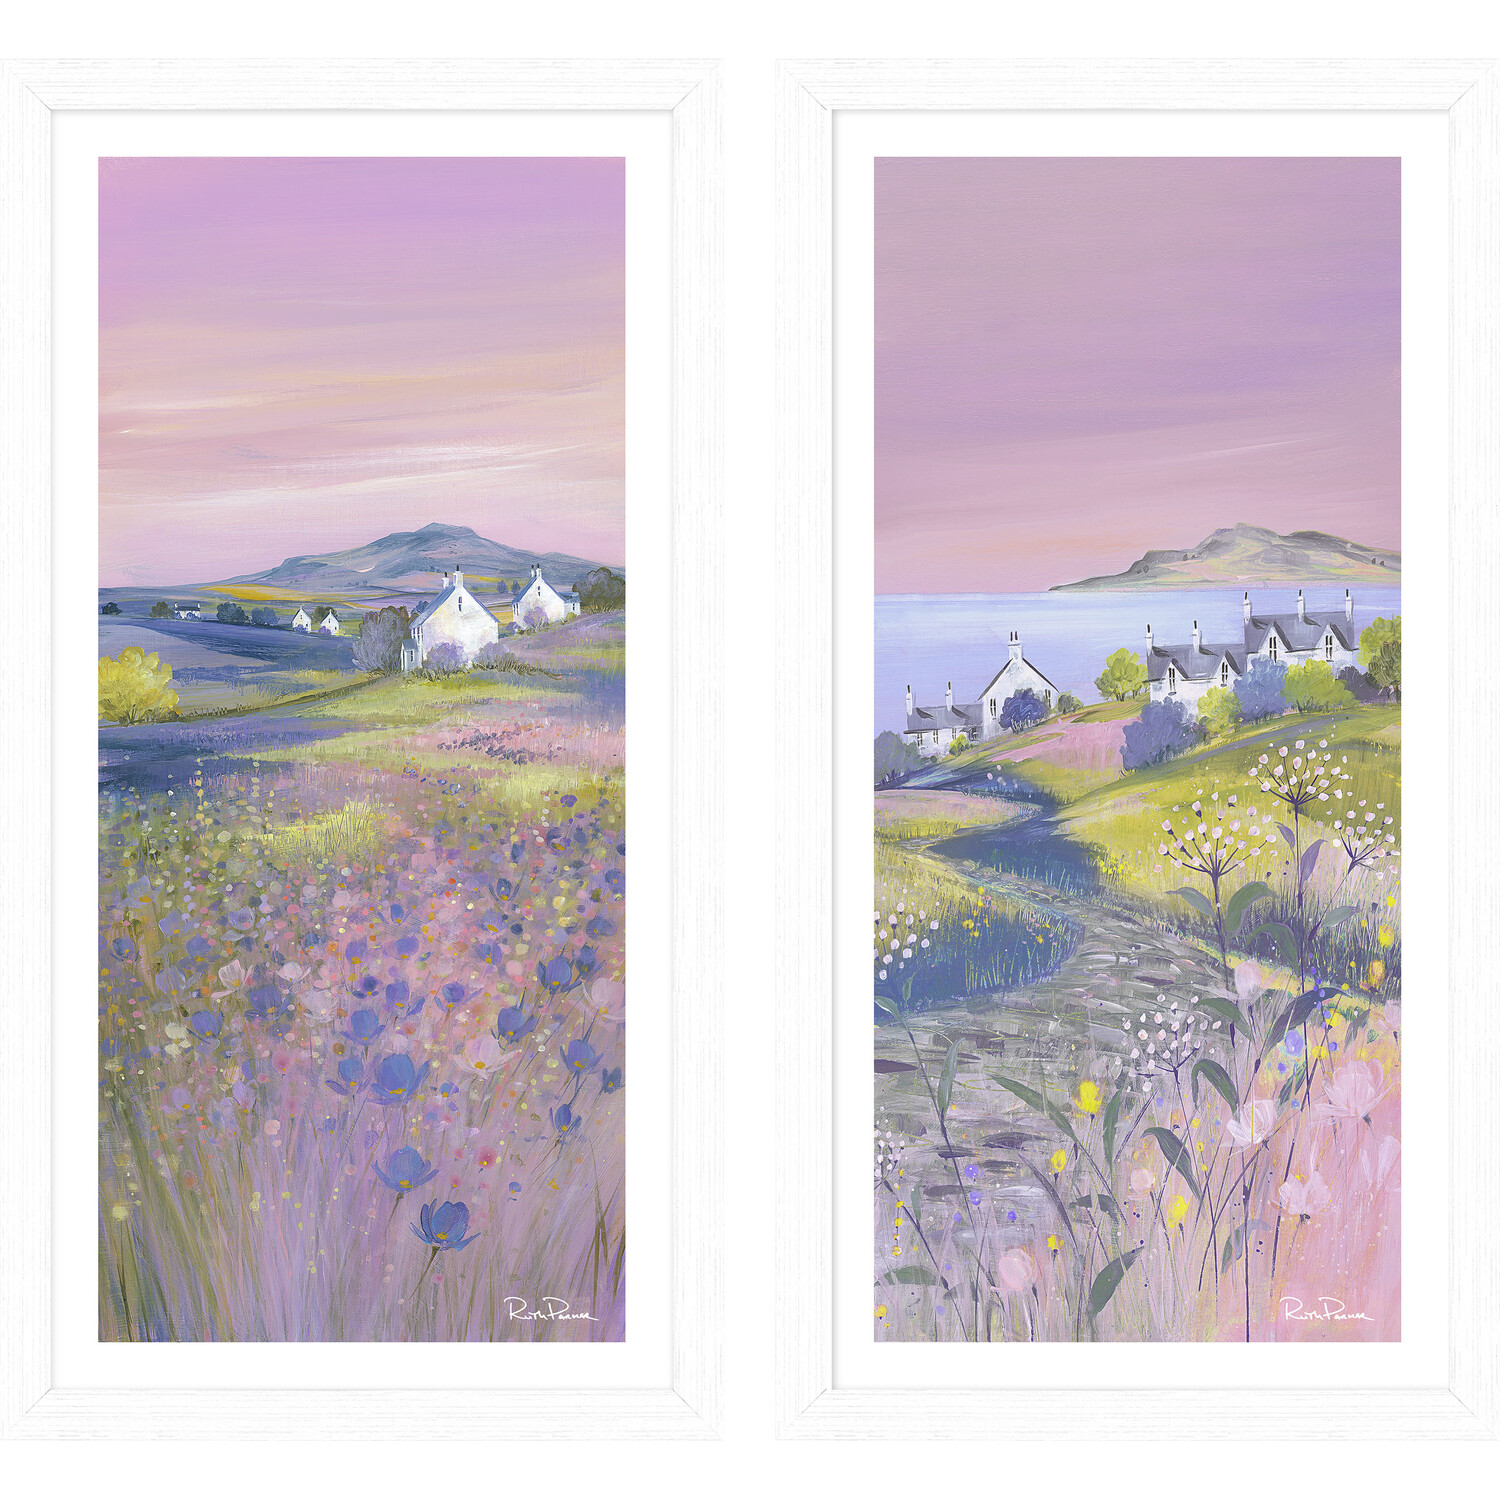 Single Ruth Parker Evening Walk Wall Art 42 x 22cm in Assorted styles Image